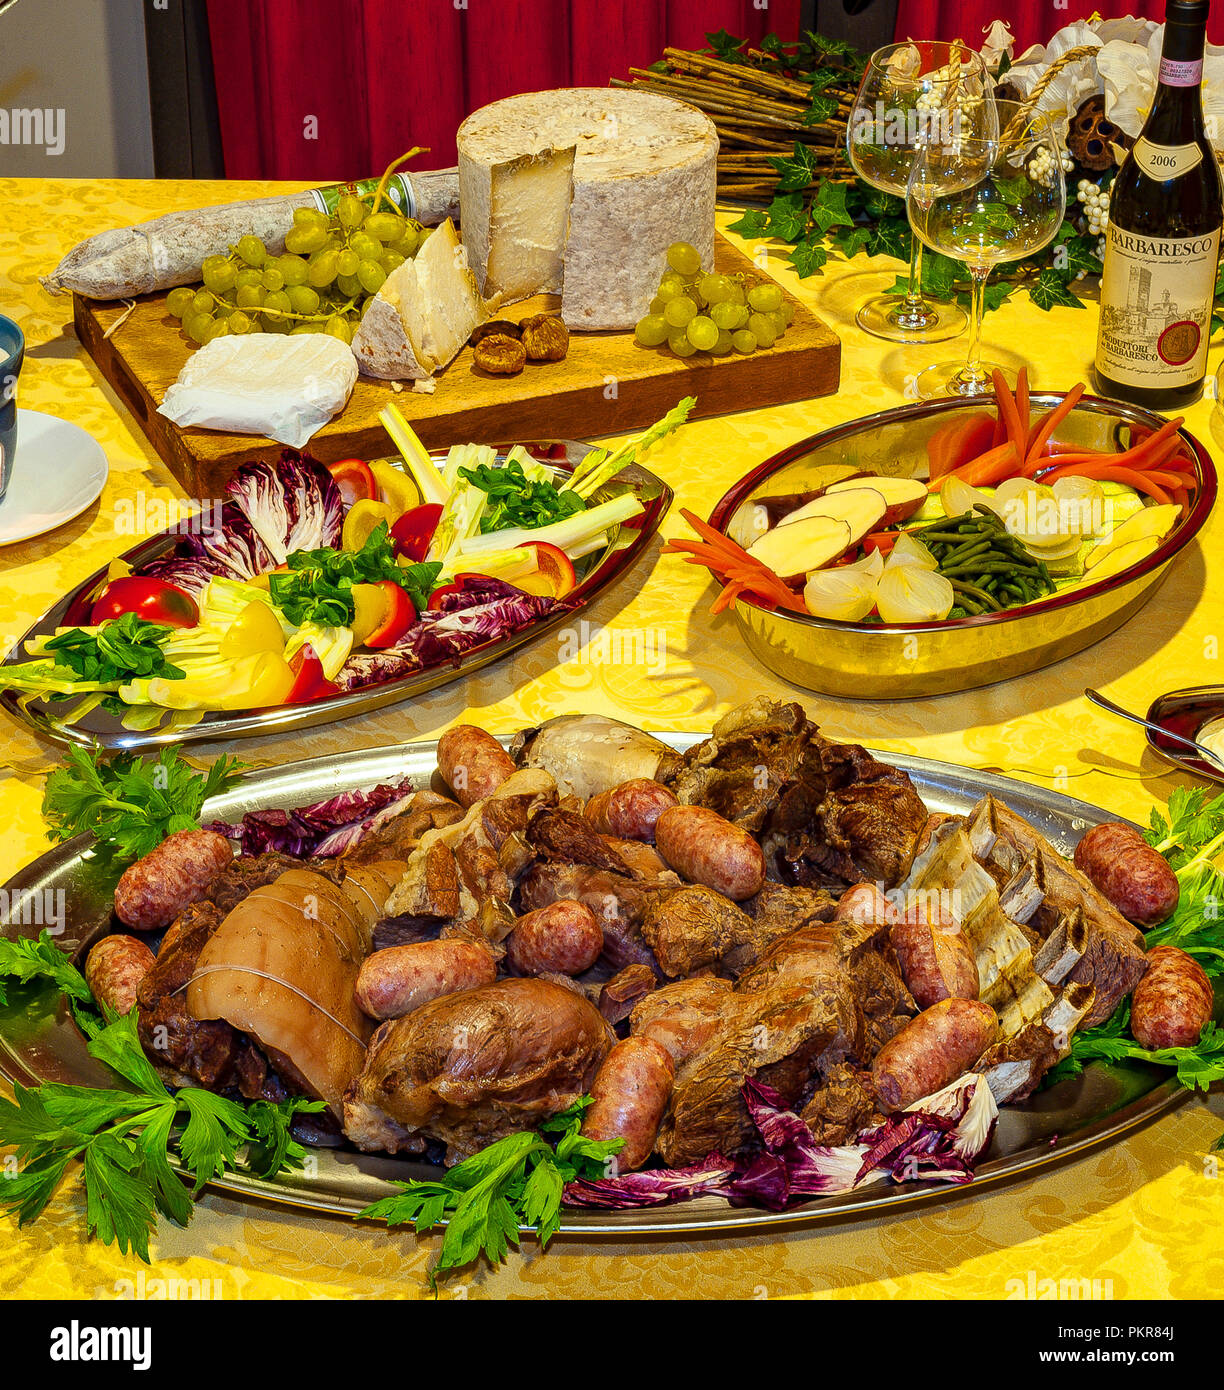 Italy Piedmont -typical dish - Boiled alla Piemontese with various types of meat selected Stock Photo